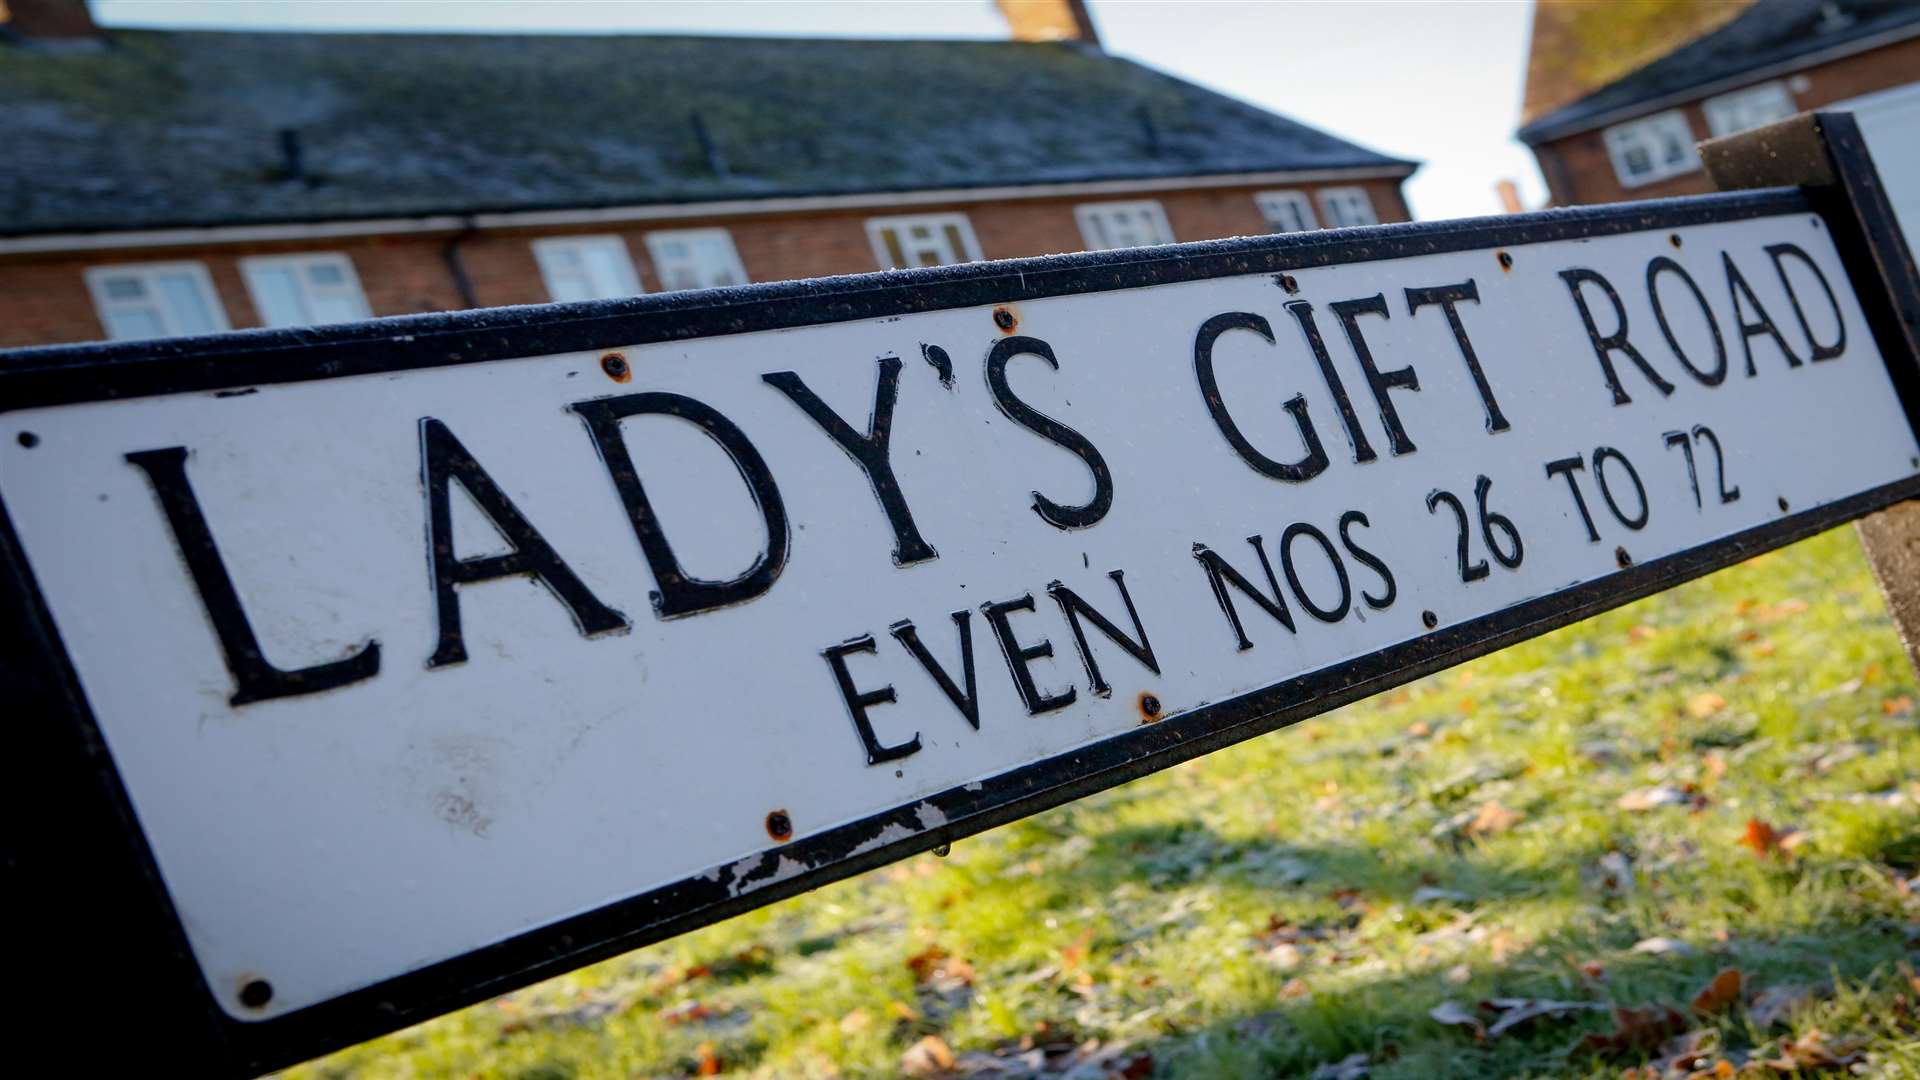 Police were called to Lady's Gift Road on Tuesday